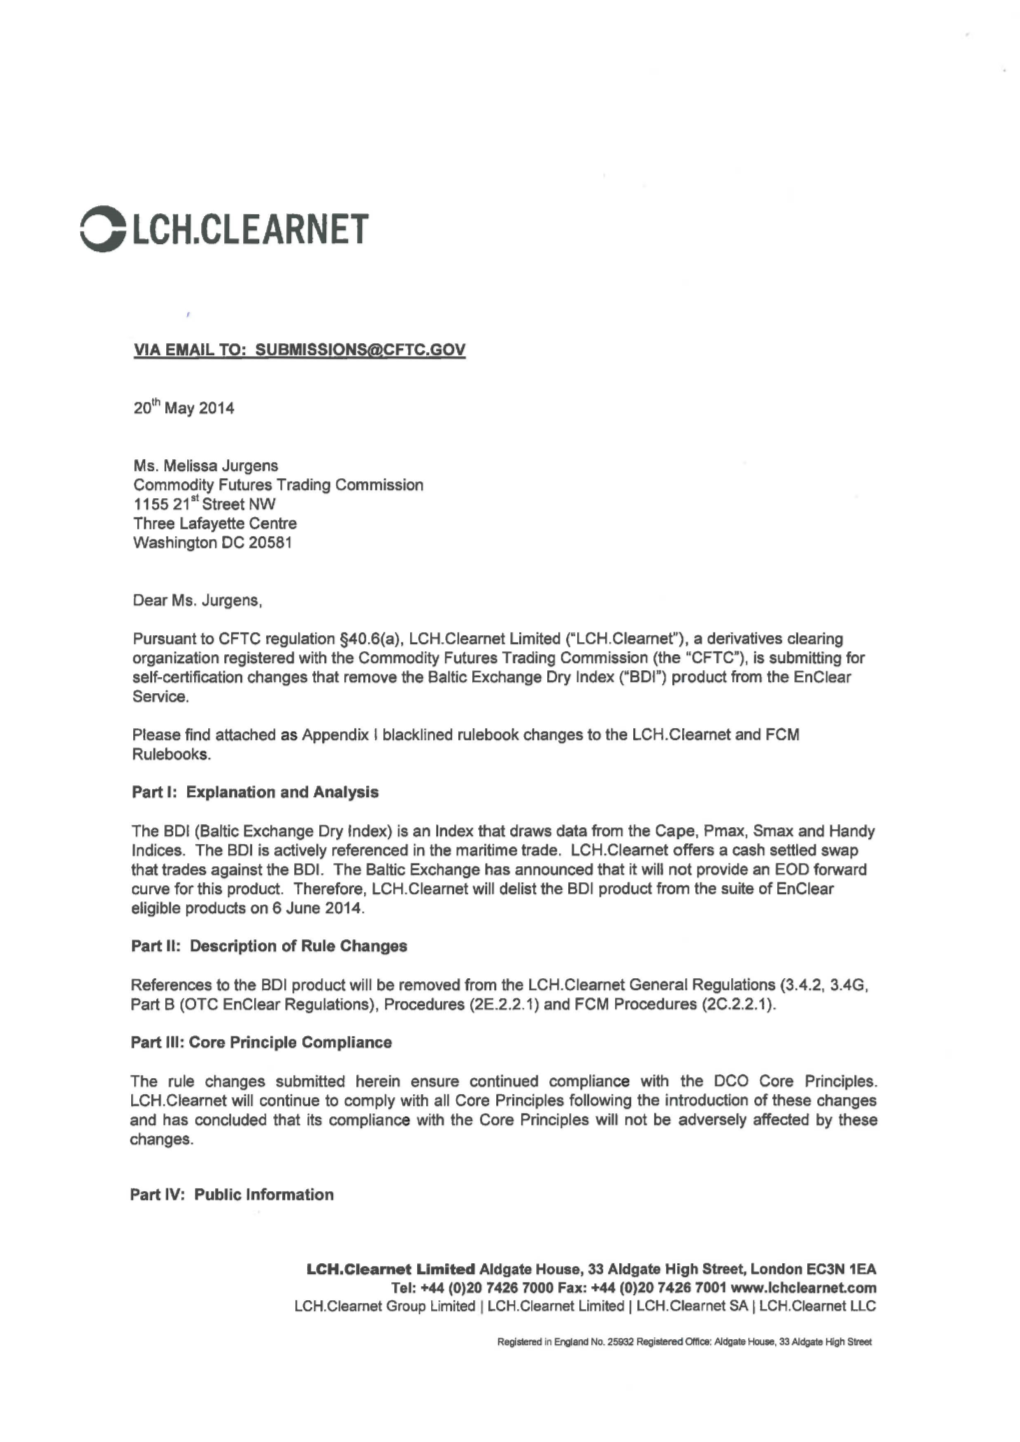 LCH.Clearnet Limited Rule Submission, May 20, 2014